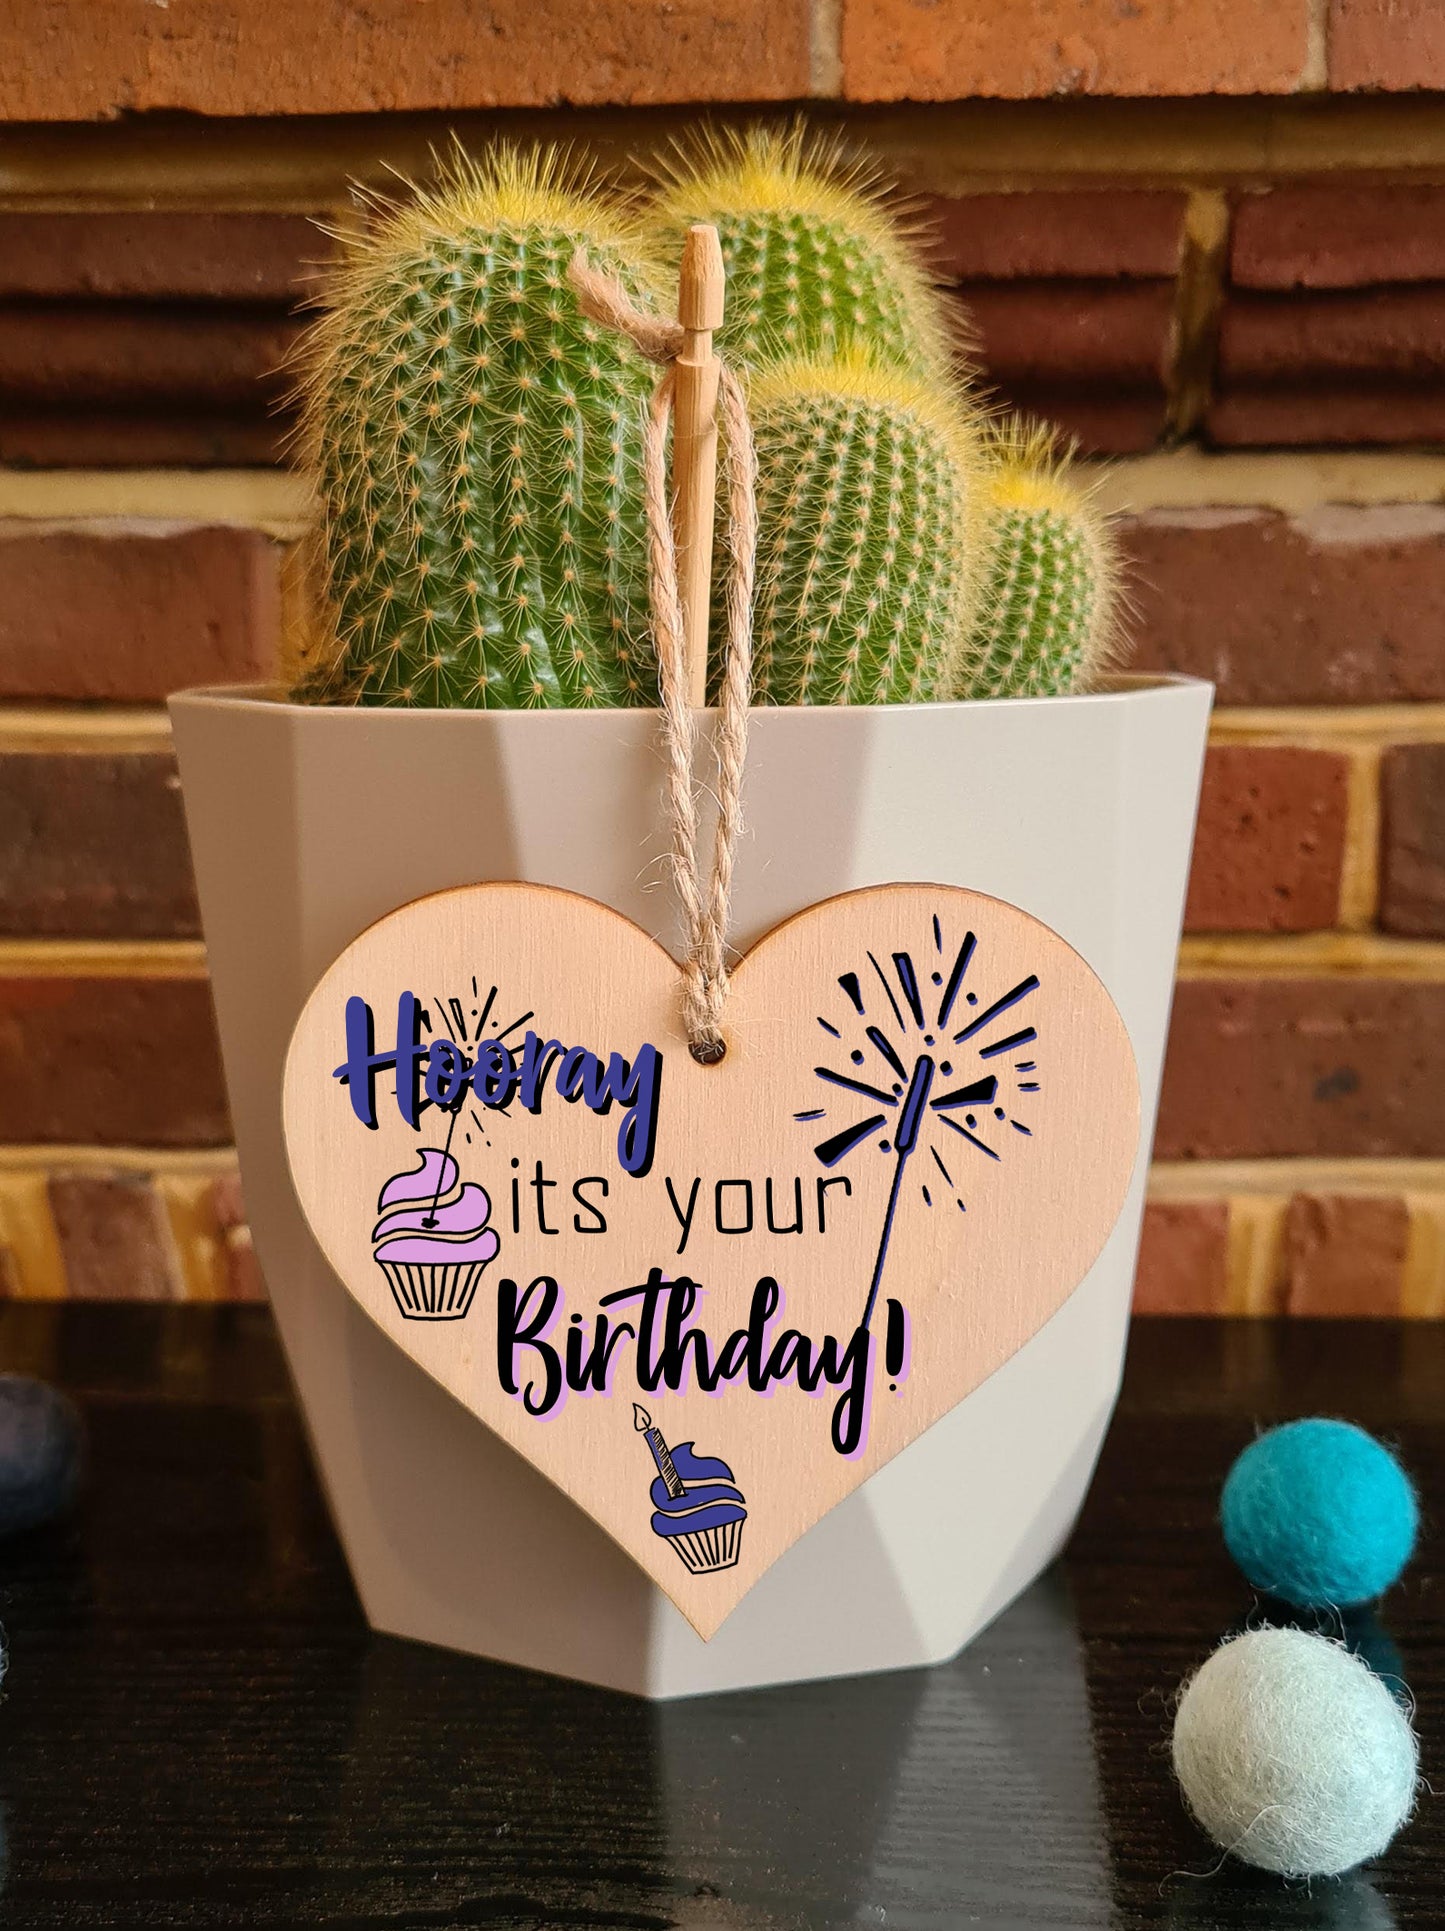 Handmade Wooden Hanging Heart Plaque Gift for Someone Special Happy Birthday Keepsake